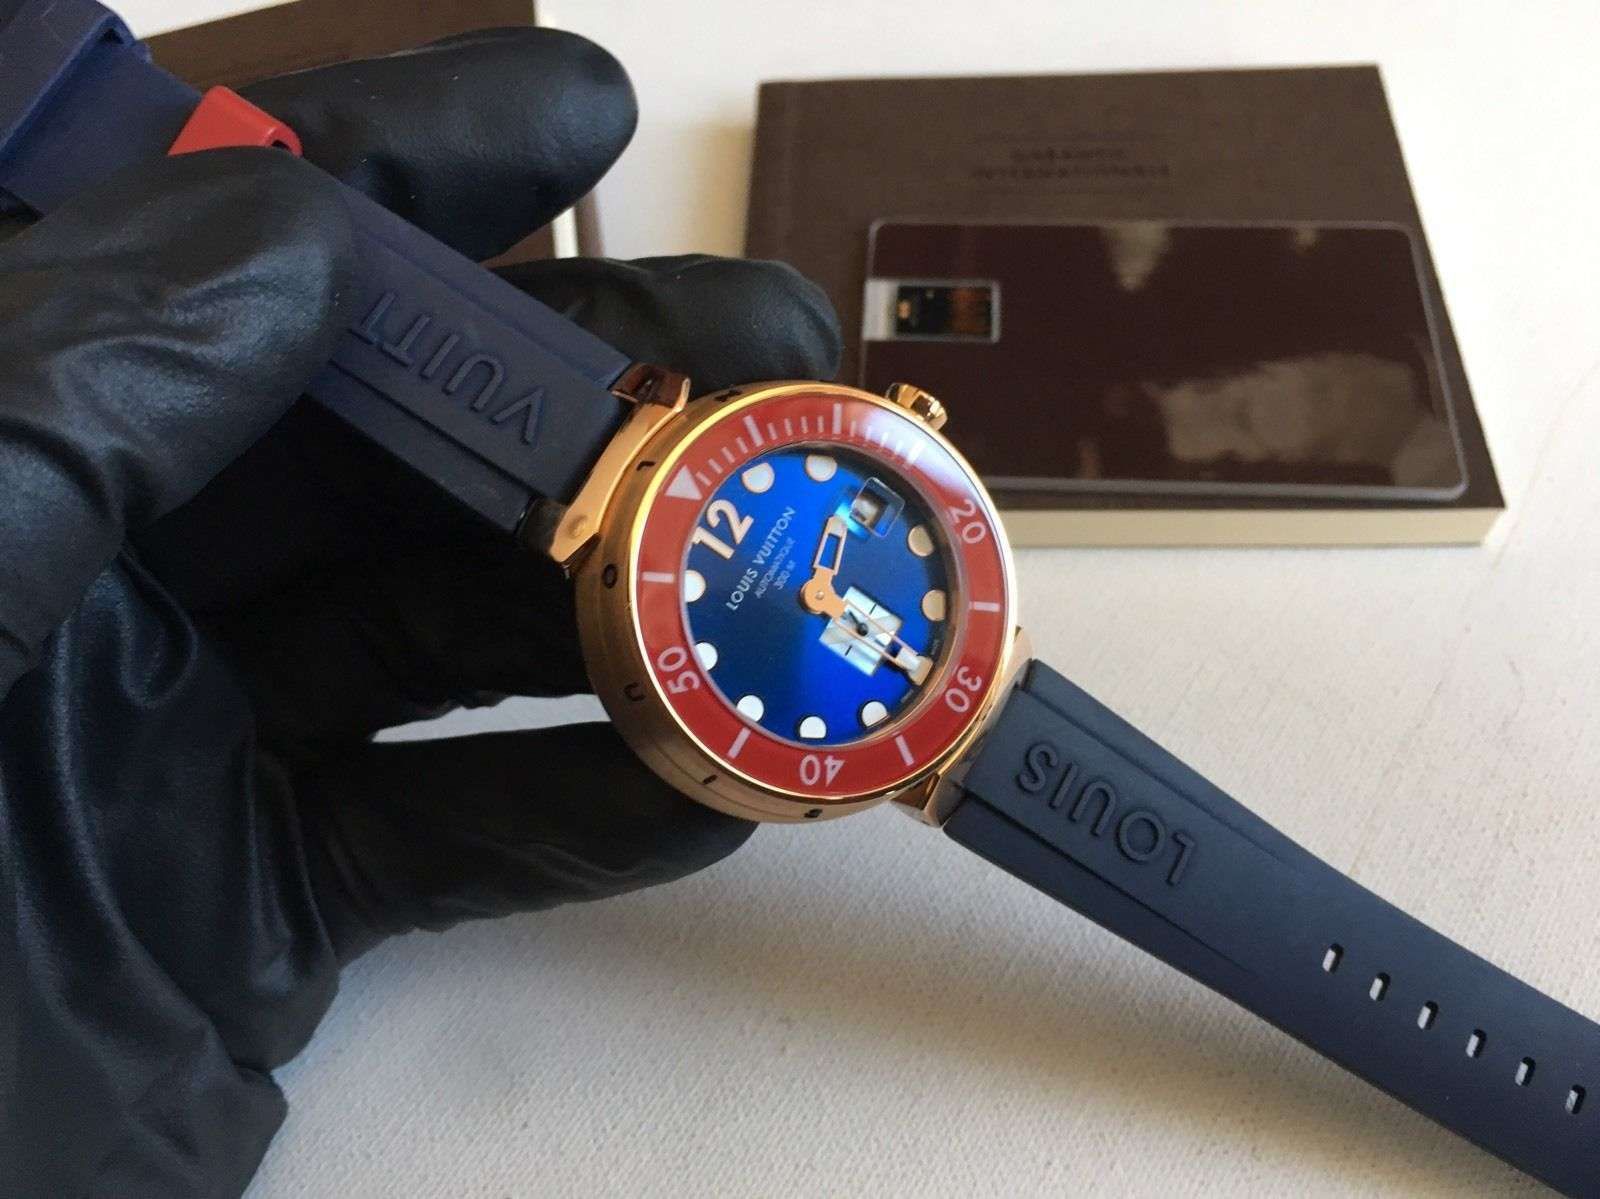 Louis Vuitton Tambour Diver Chronograph Price | Confederated Tribes of the Umatilla Indian ...